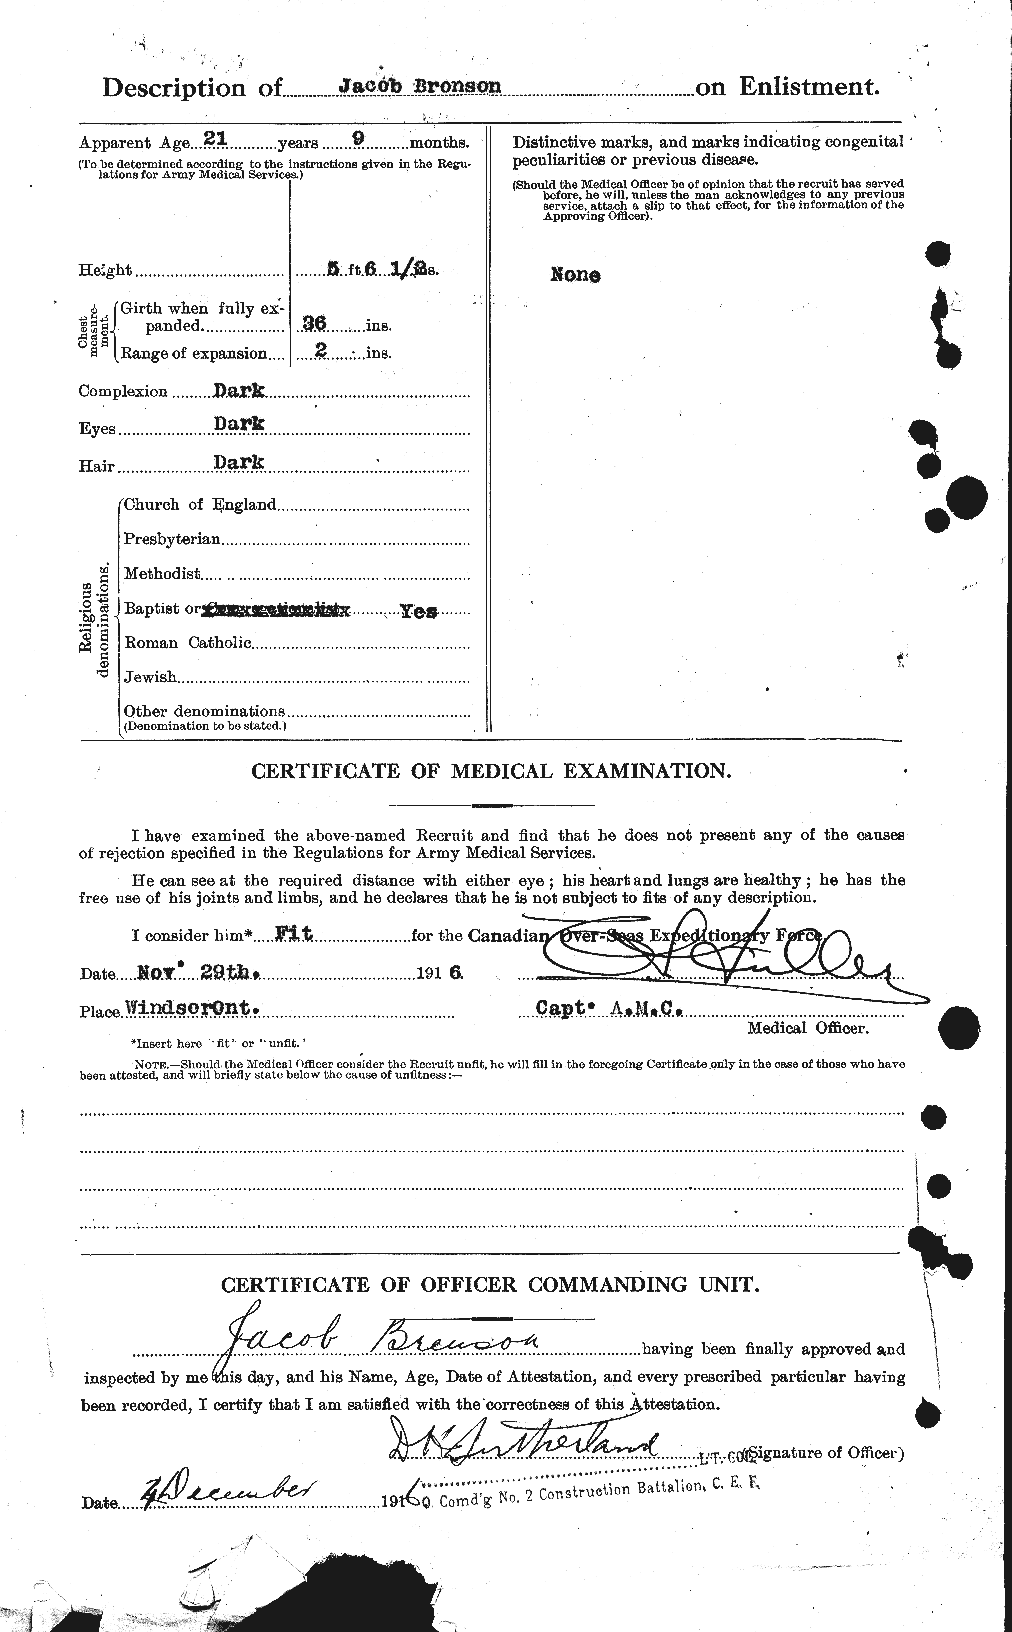 Personnel Records of the First World War - CEF 262235b